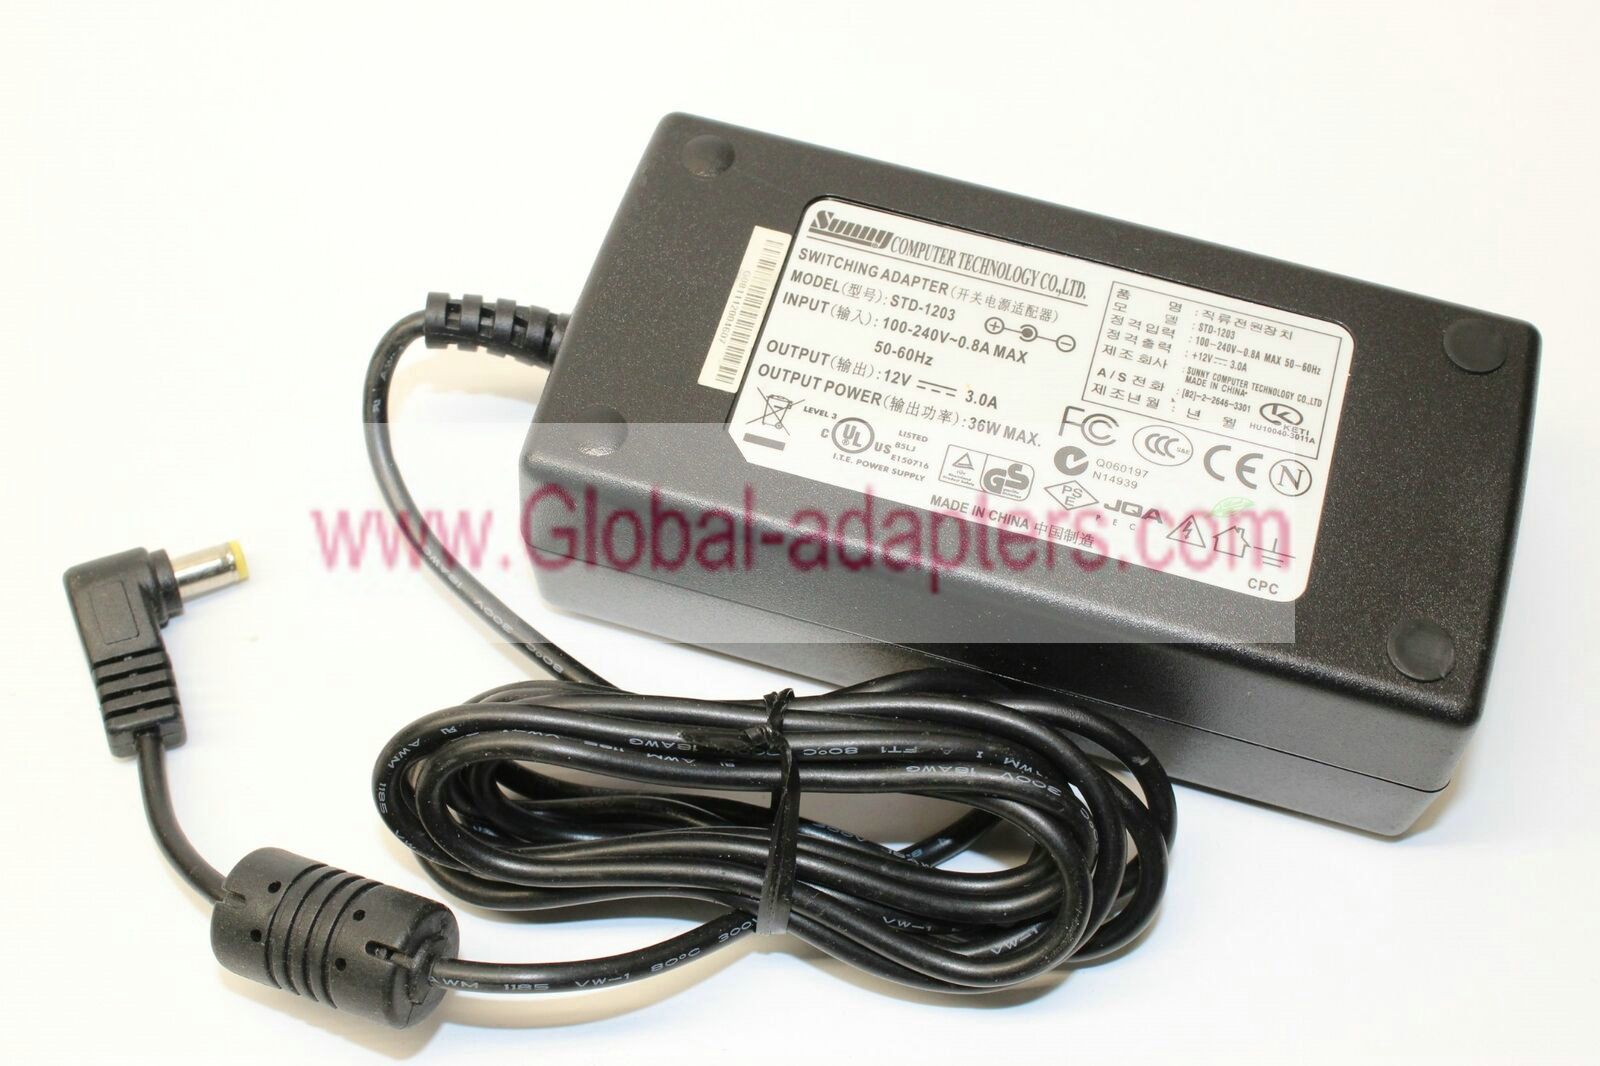 New Sunny STD-1203 Switching Adapter 12V 3A Transformer Charger Power Supply